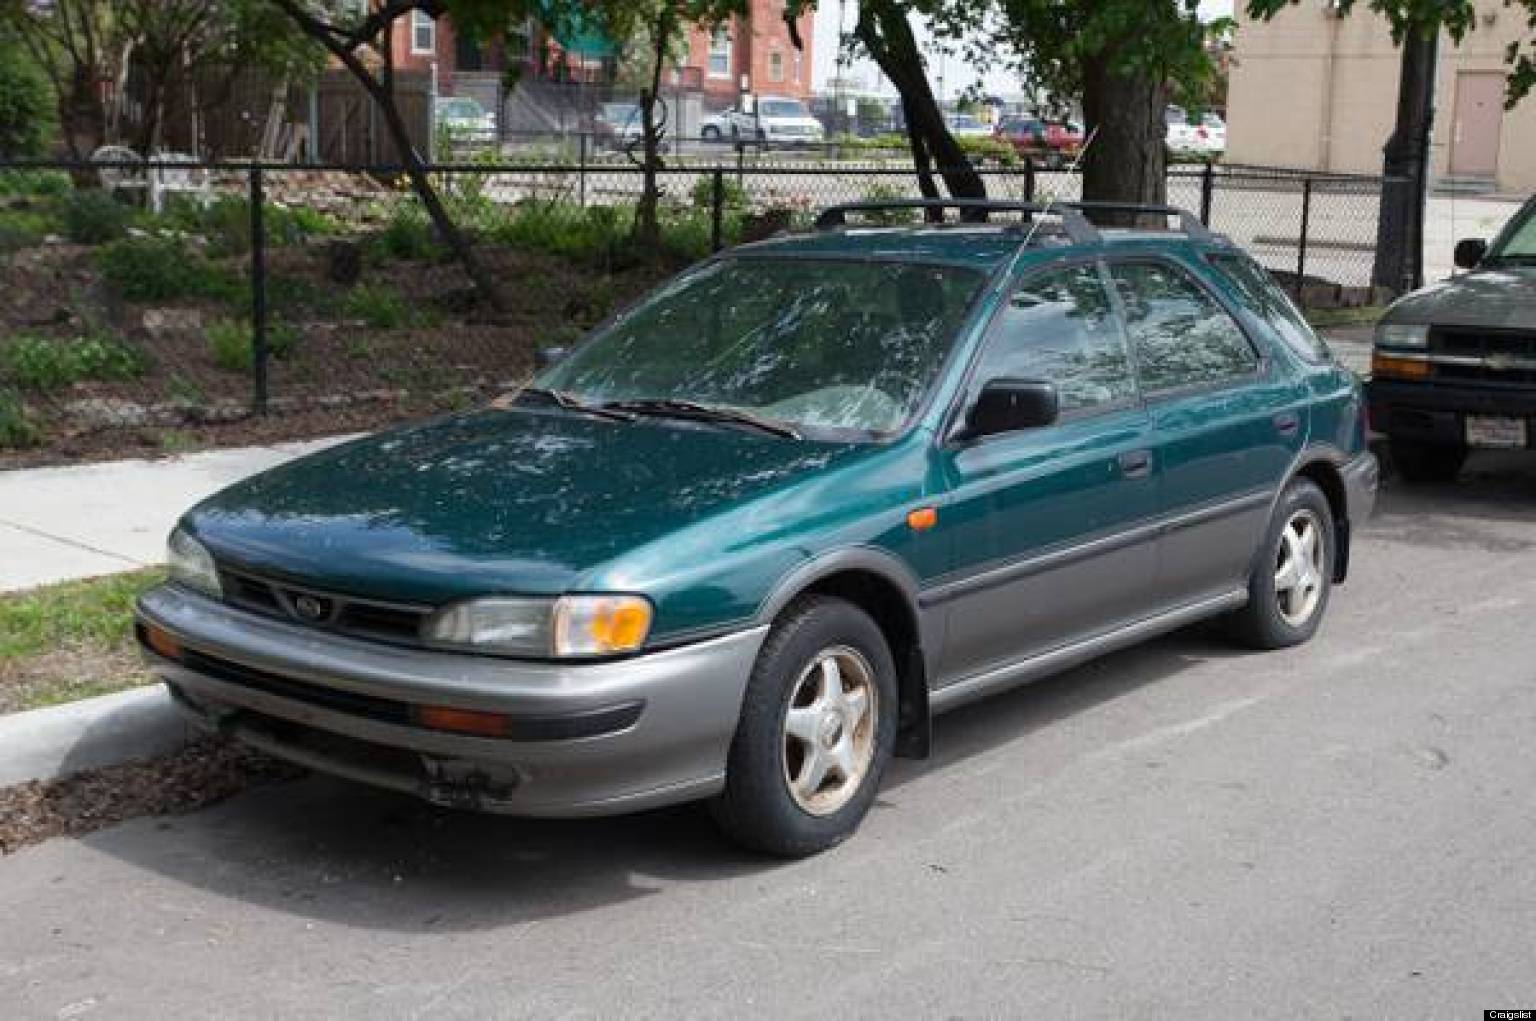 Subaru Craigslist Ad Is Brutally, Hilariously Honest About ...